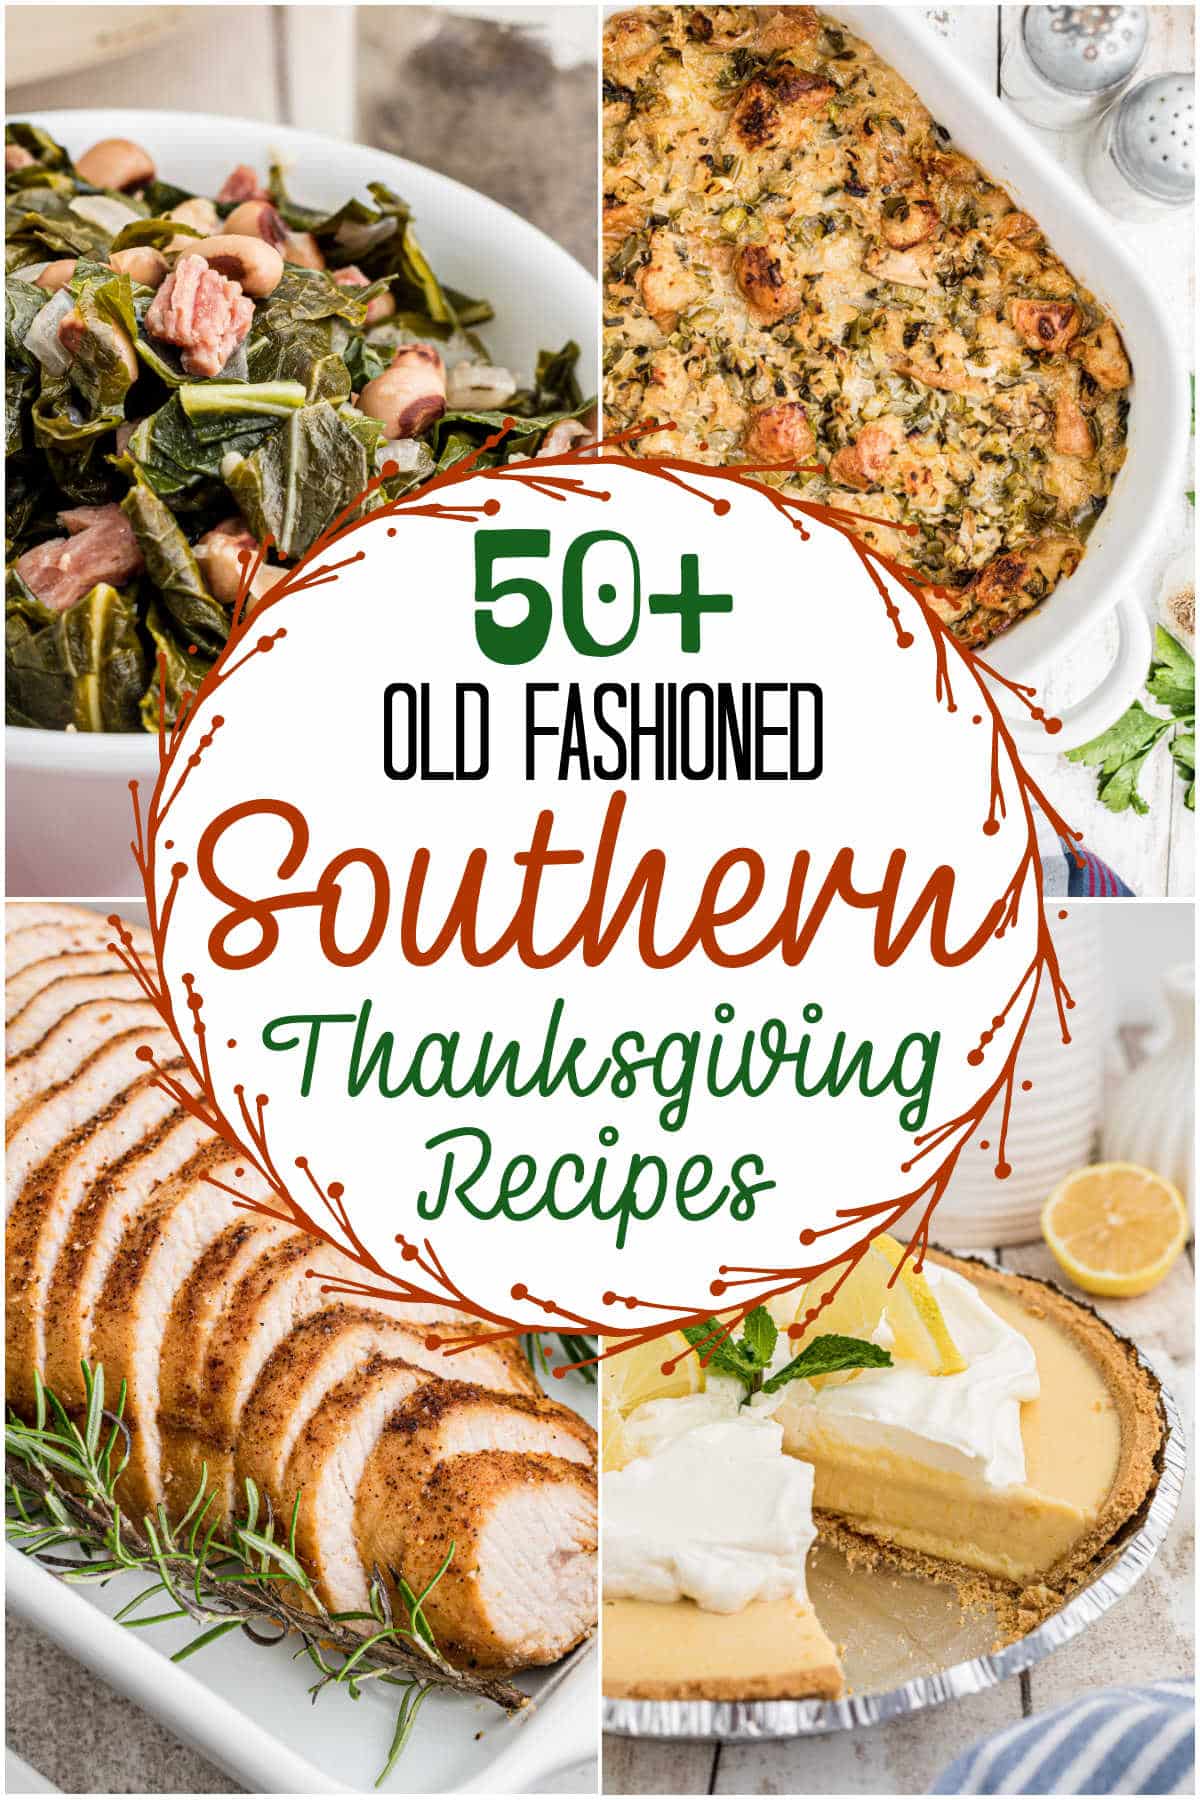 A collage of four images showing southern thanksgiving recipes.